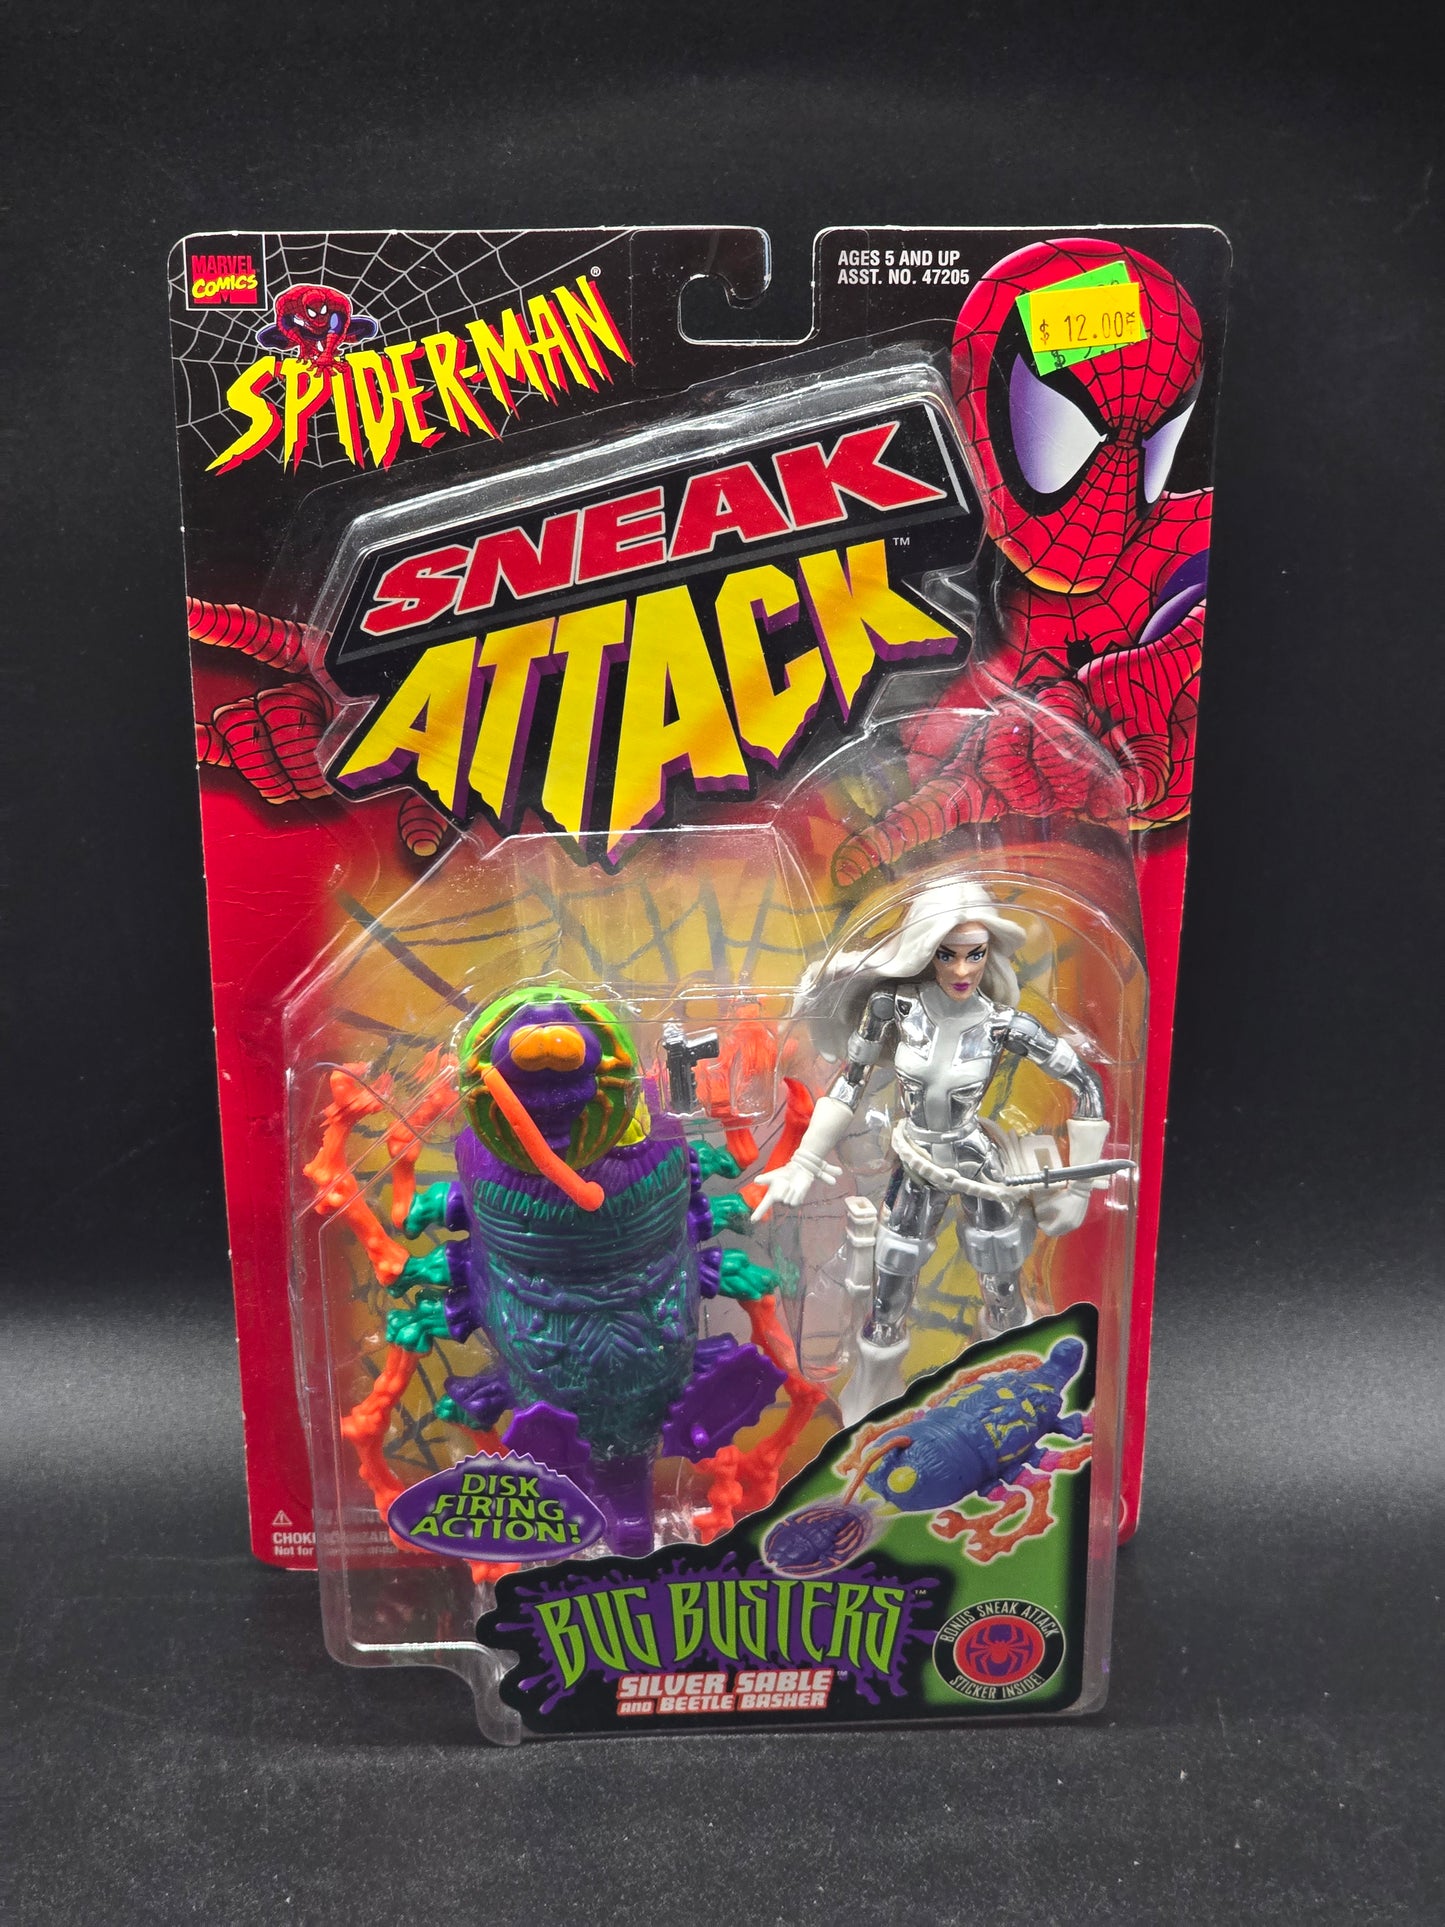 Silver Sable and Beetle Basher Spider-Man Toybiz 1998